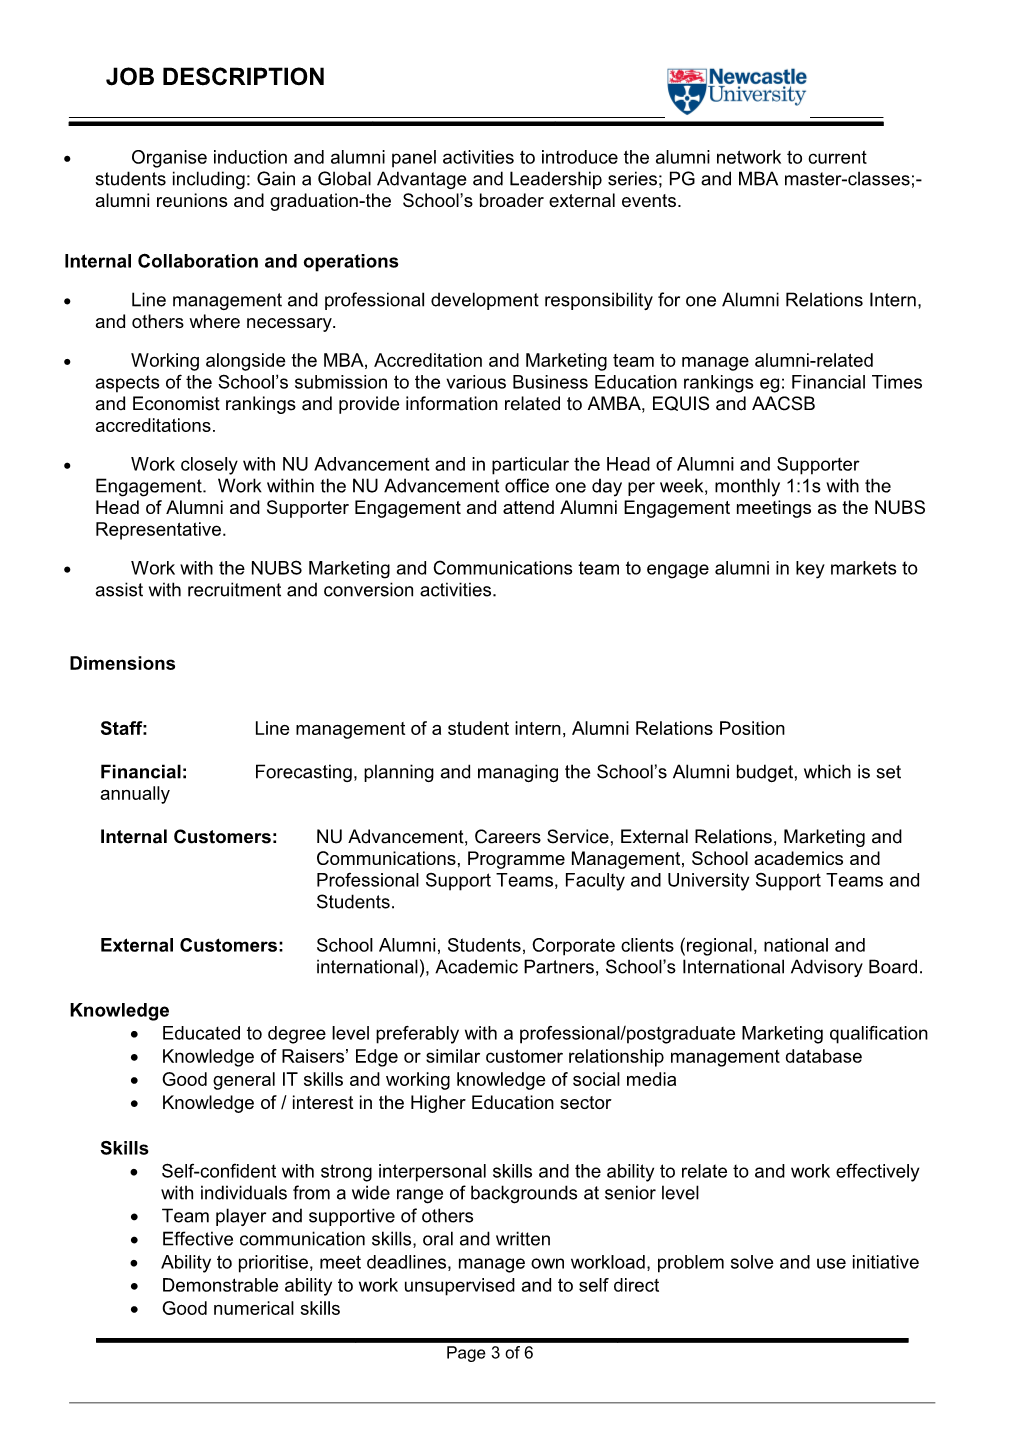 Human Resources Policy Document